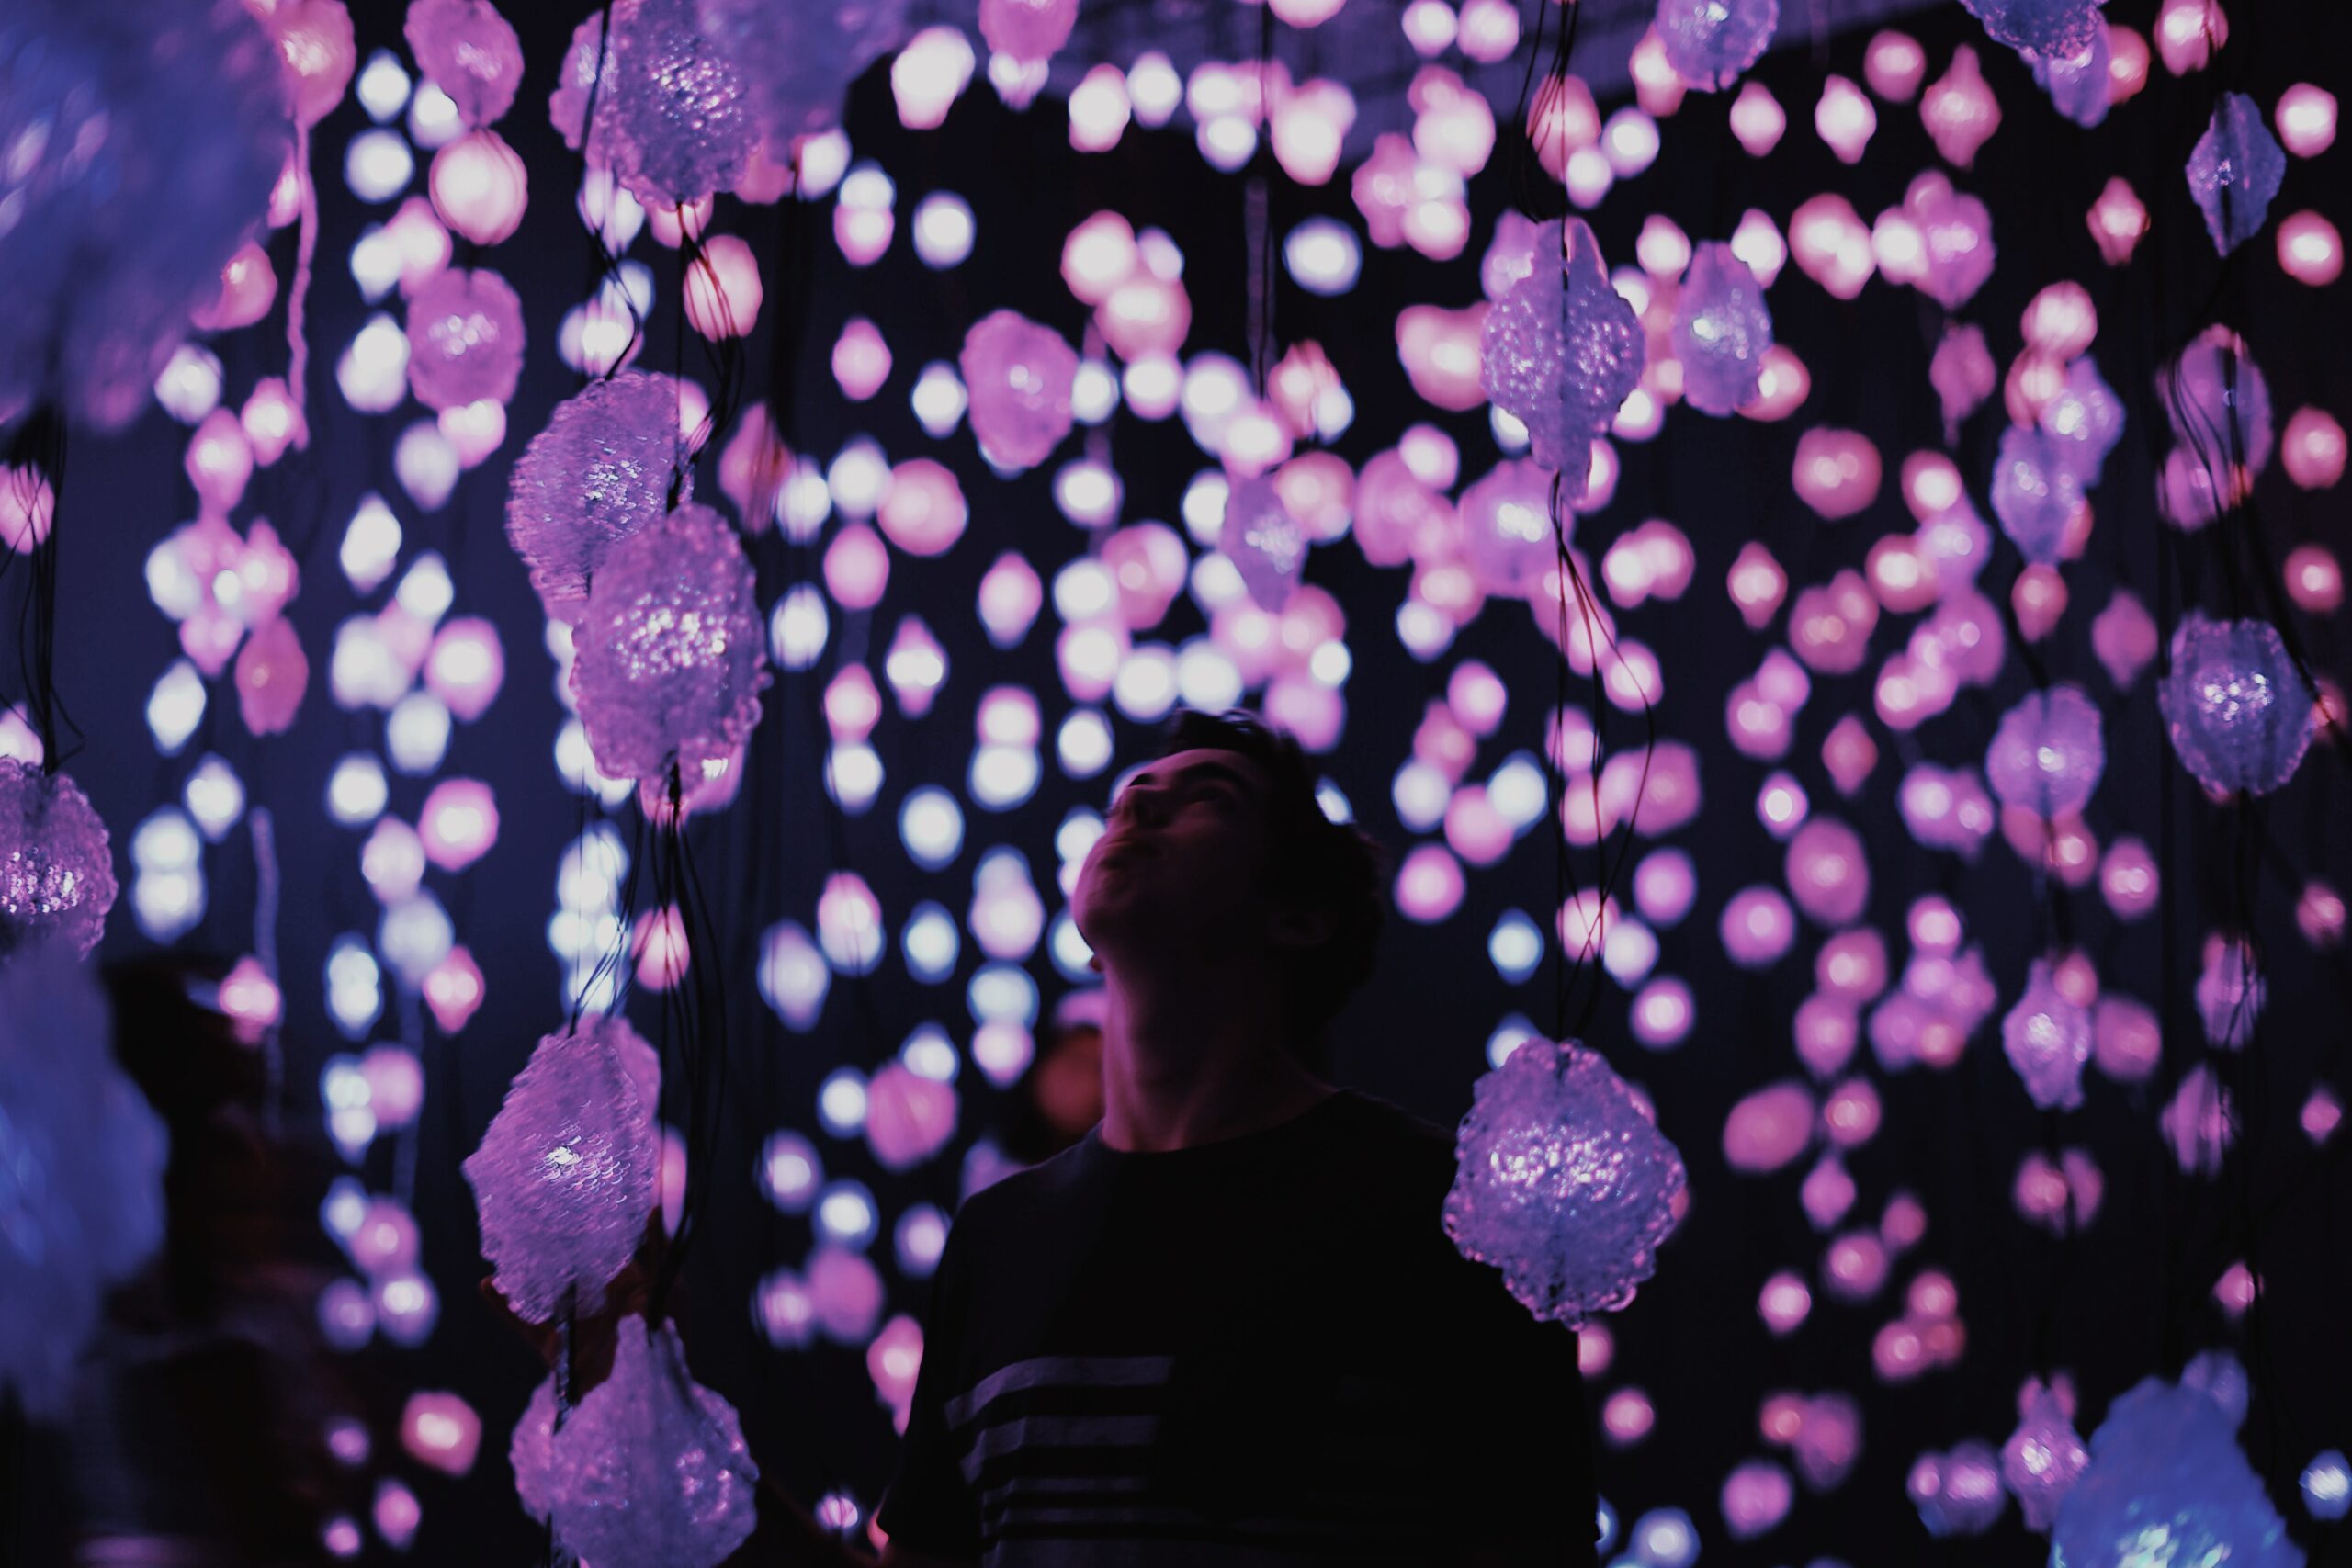 A teen boy looking around an light art exhibition - a The Guide to Giving Experiences as Gifts